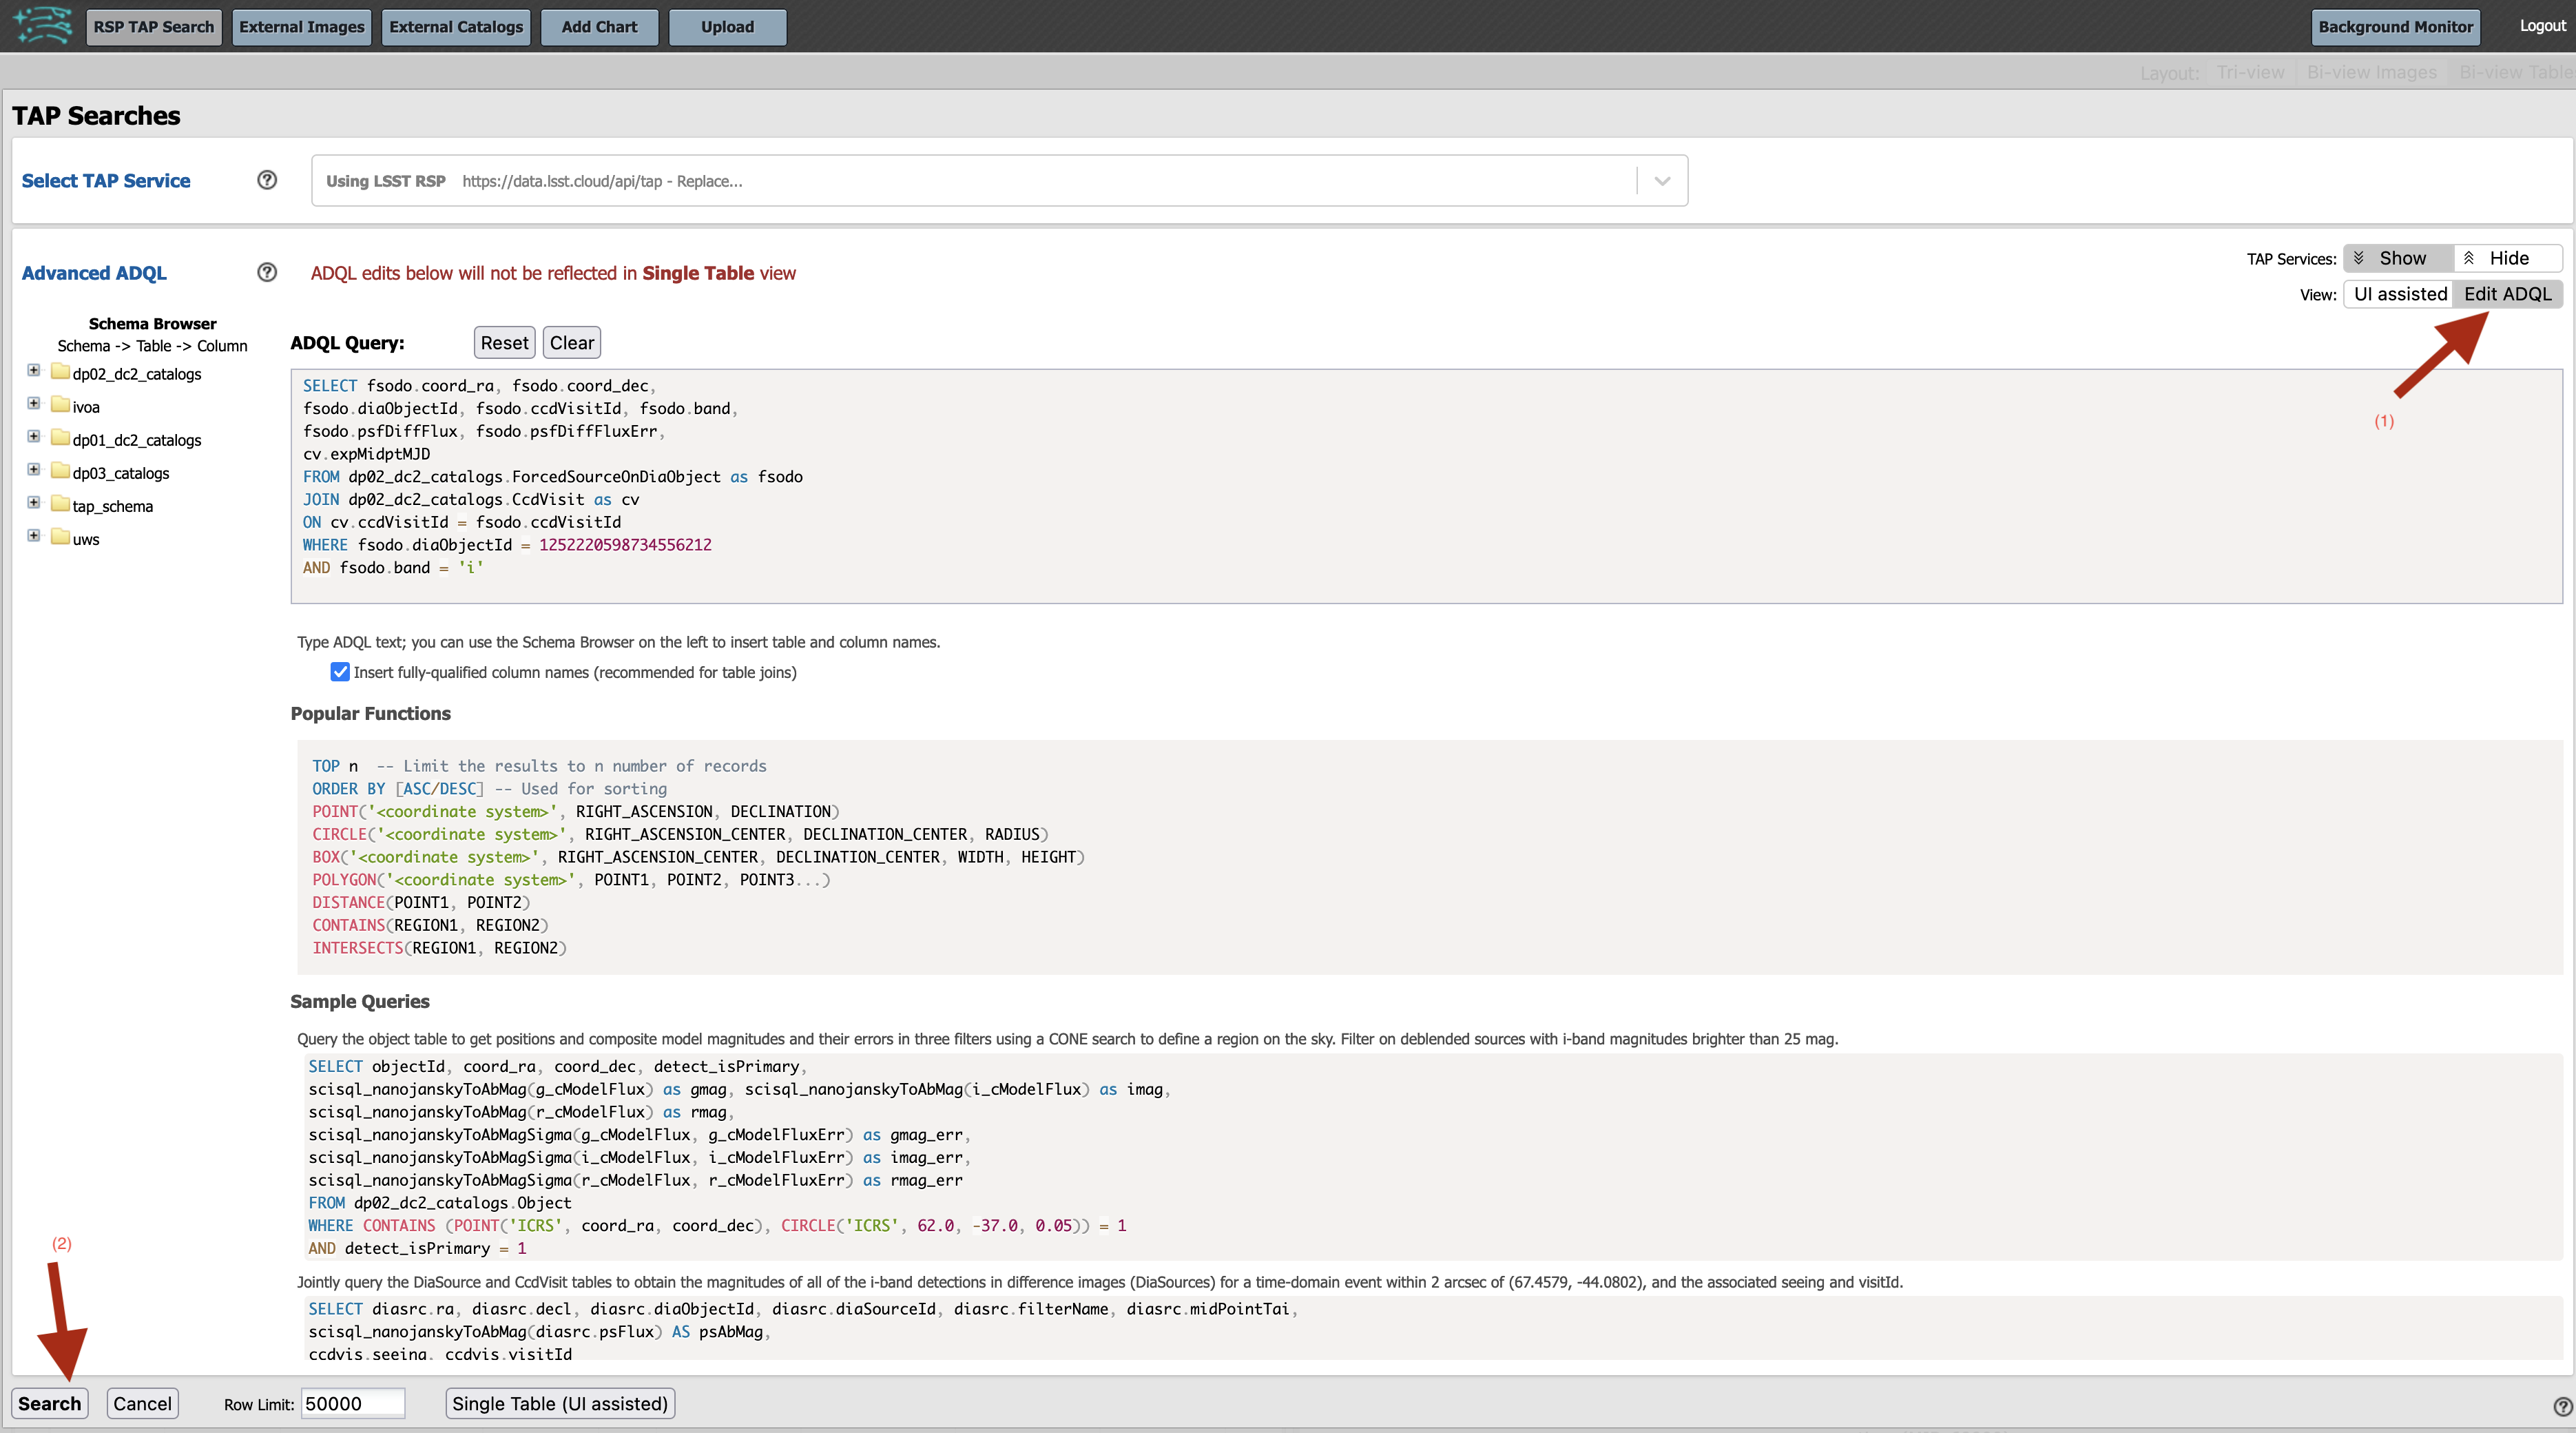 A screenshot of the ADQL Query view of the Portal user interface.